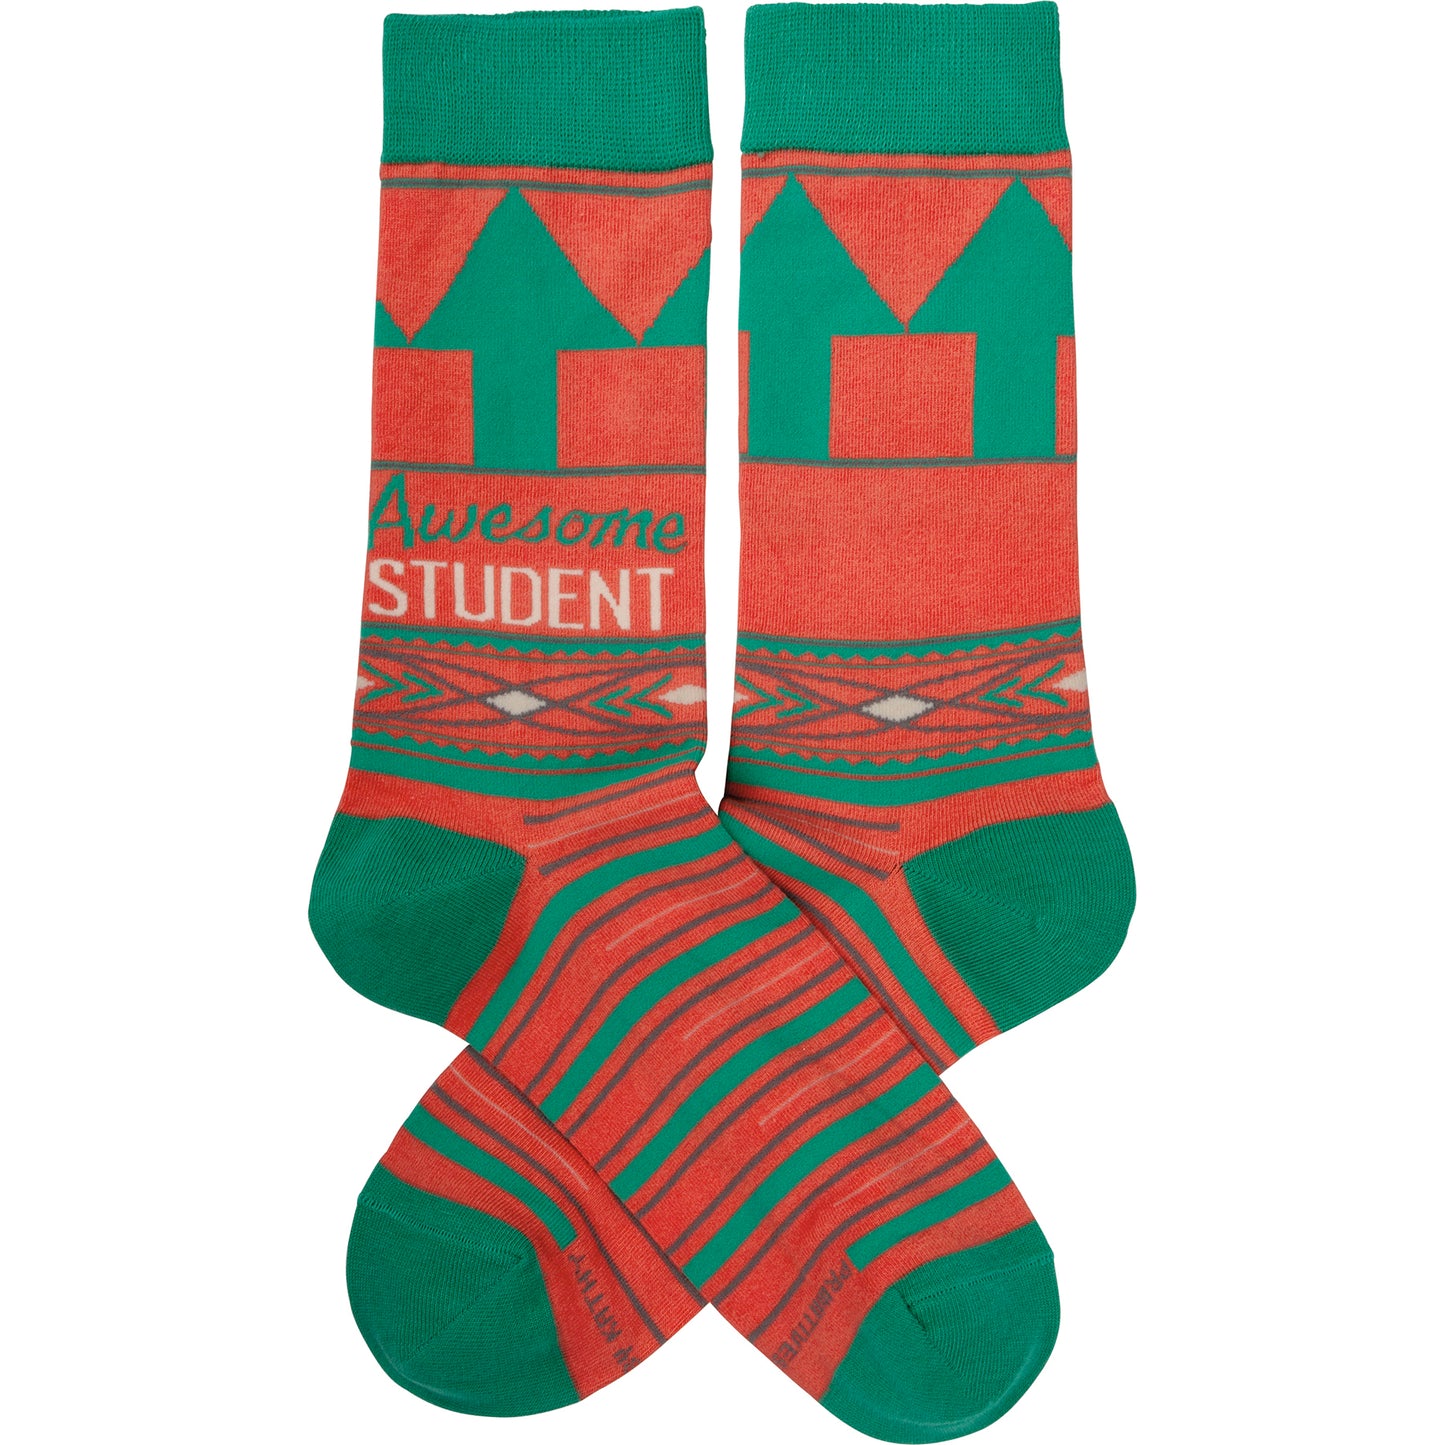 "Awesome Student" Socks